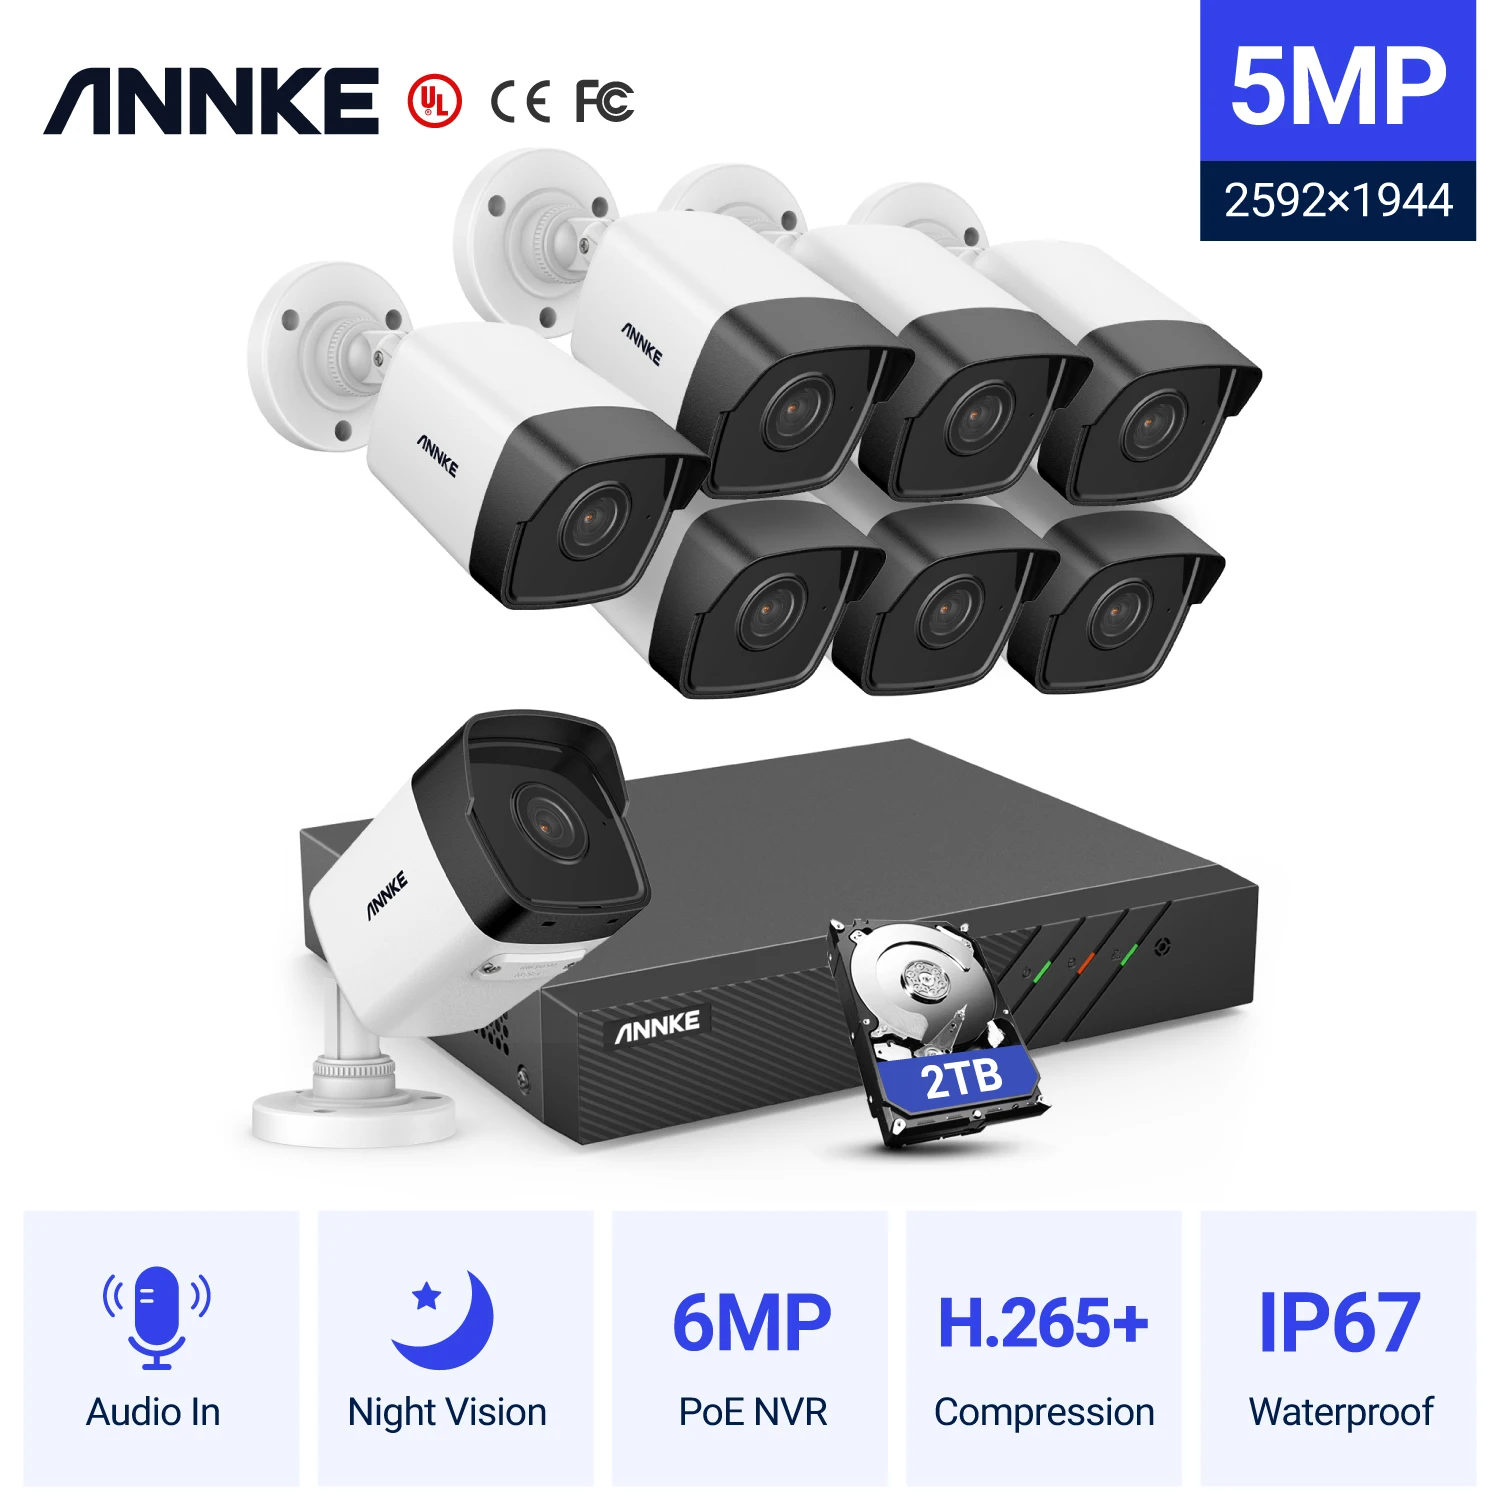 

ANNKE H500 5MP H.265+ 8CH HD PoE Network Video Security System 8pcs Waterproof Outdoor POE IP Cameras Plug & Play PoE Camera Kit